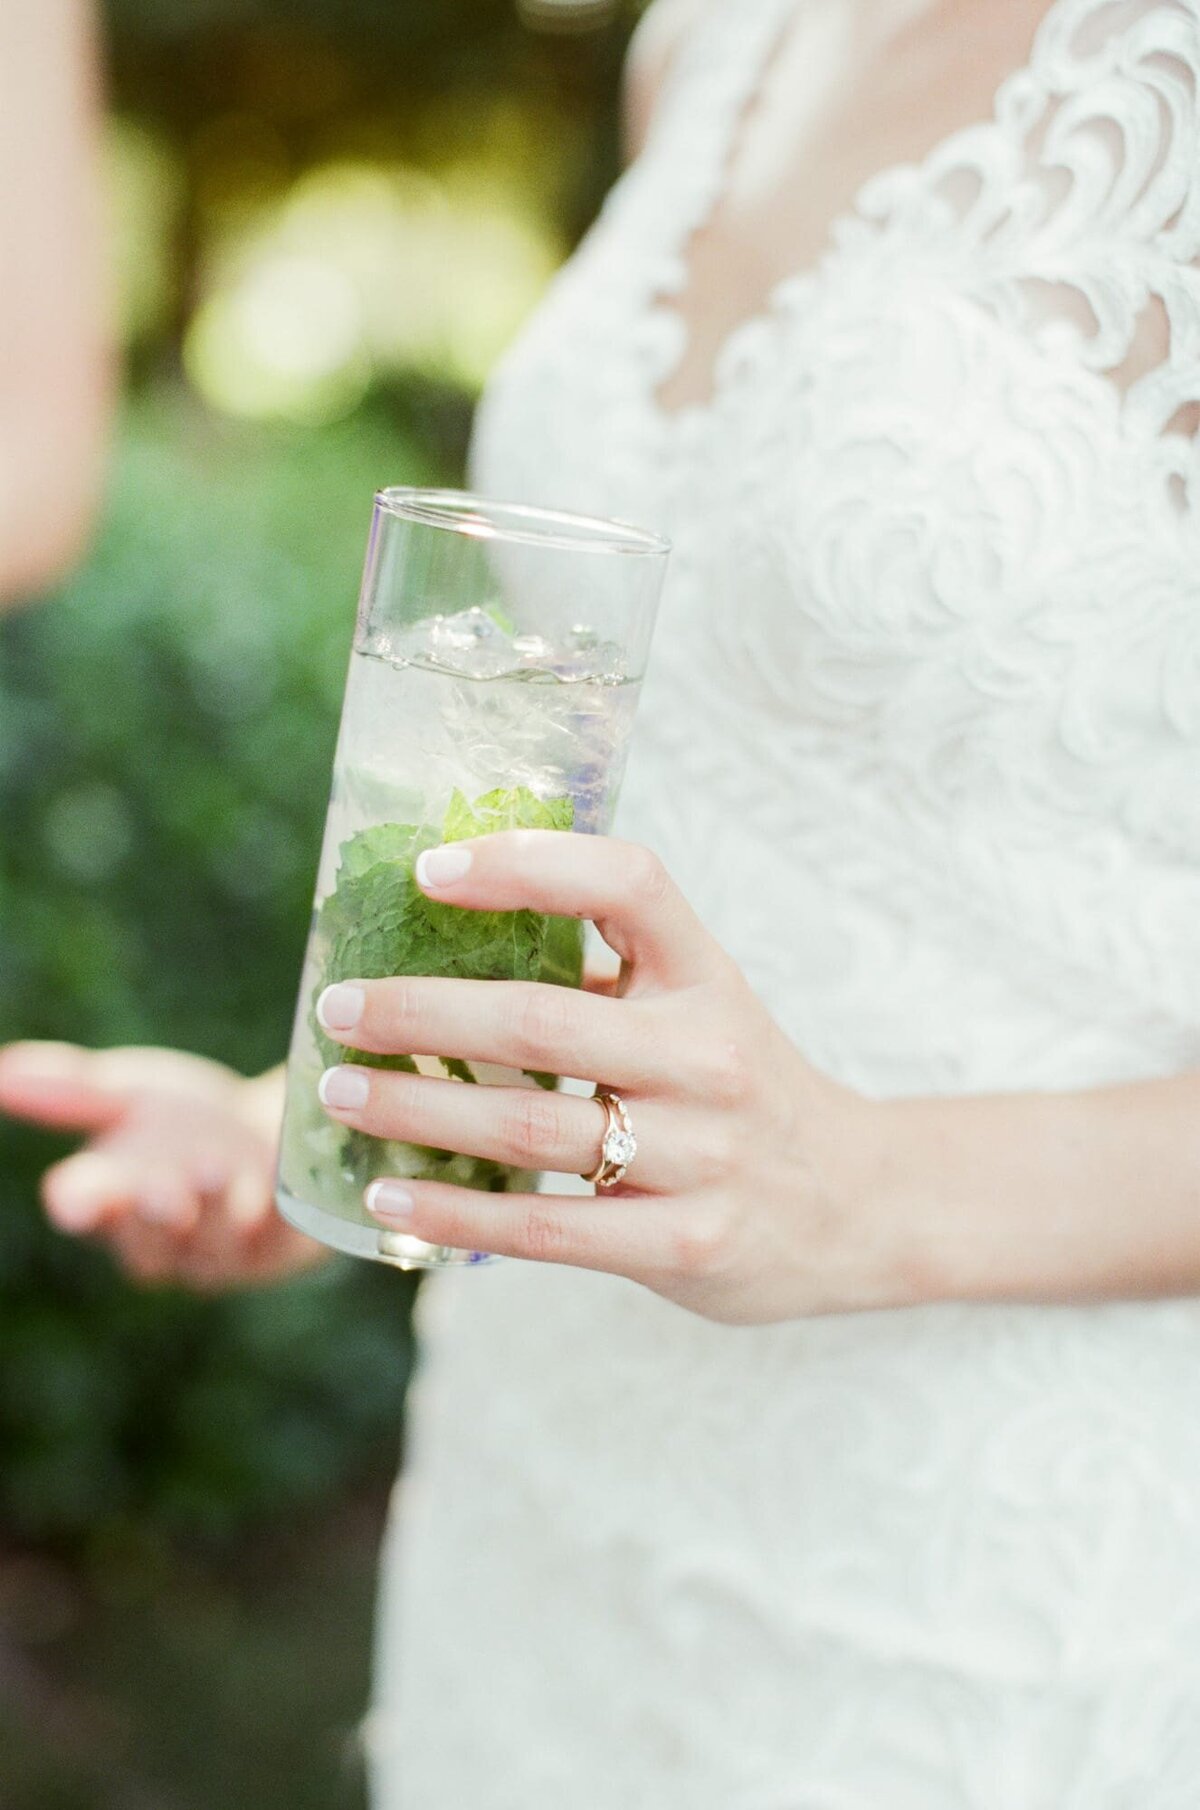 Wedding bride's hand holding a healthy drink with a wedding ring on her finger.